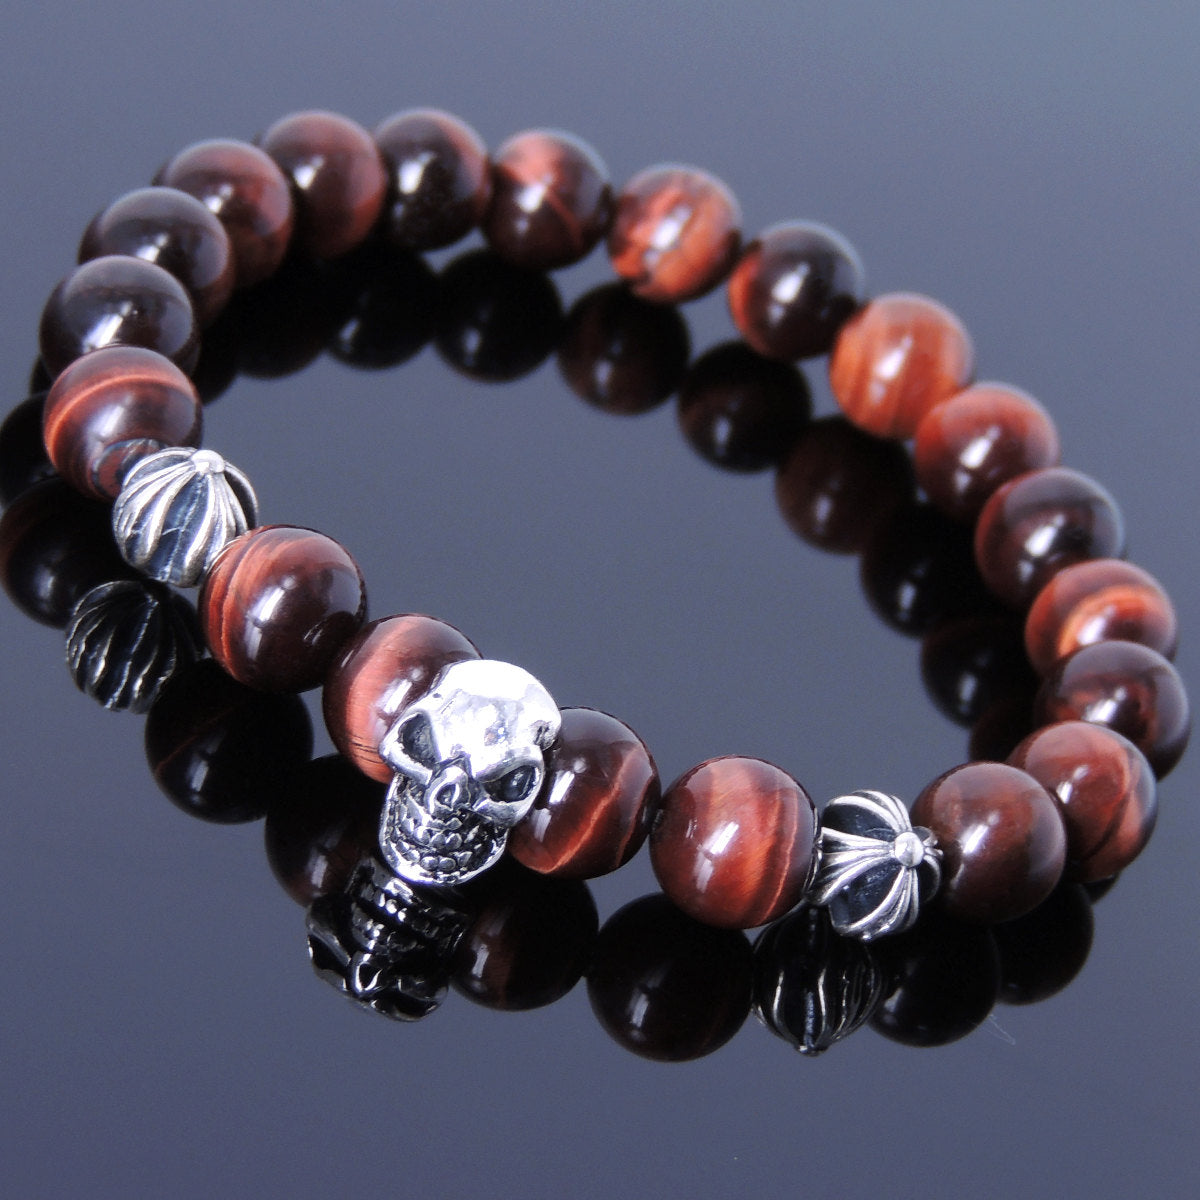 8mm Red Tiger Eye Healing Gemstone Bracelet with S925 Sterling Silver Protective Skull & Cross Beads- Handmade by Gem & Silver BR753